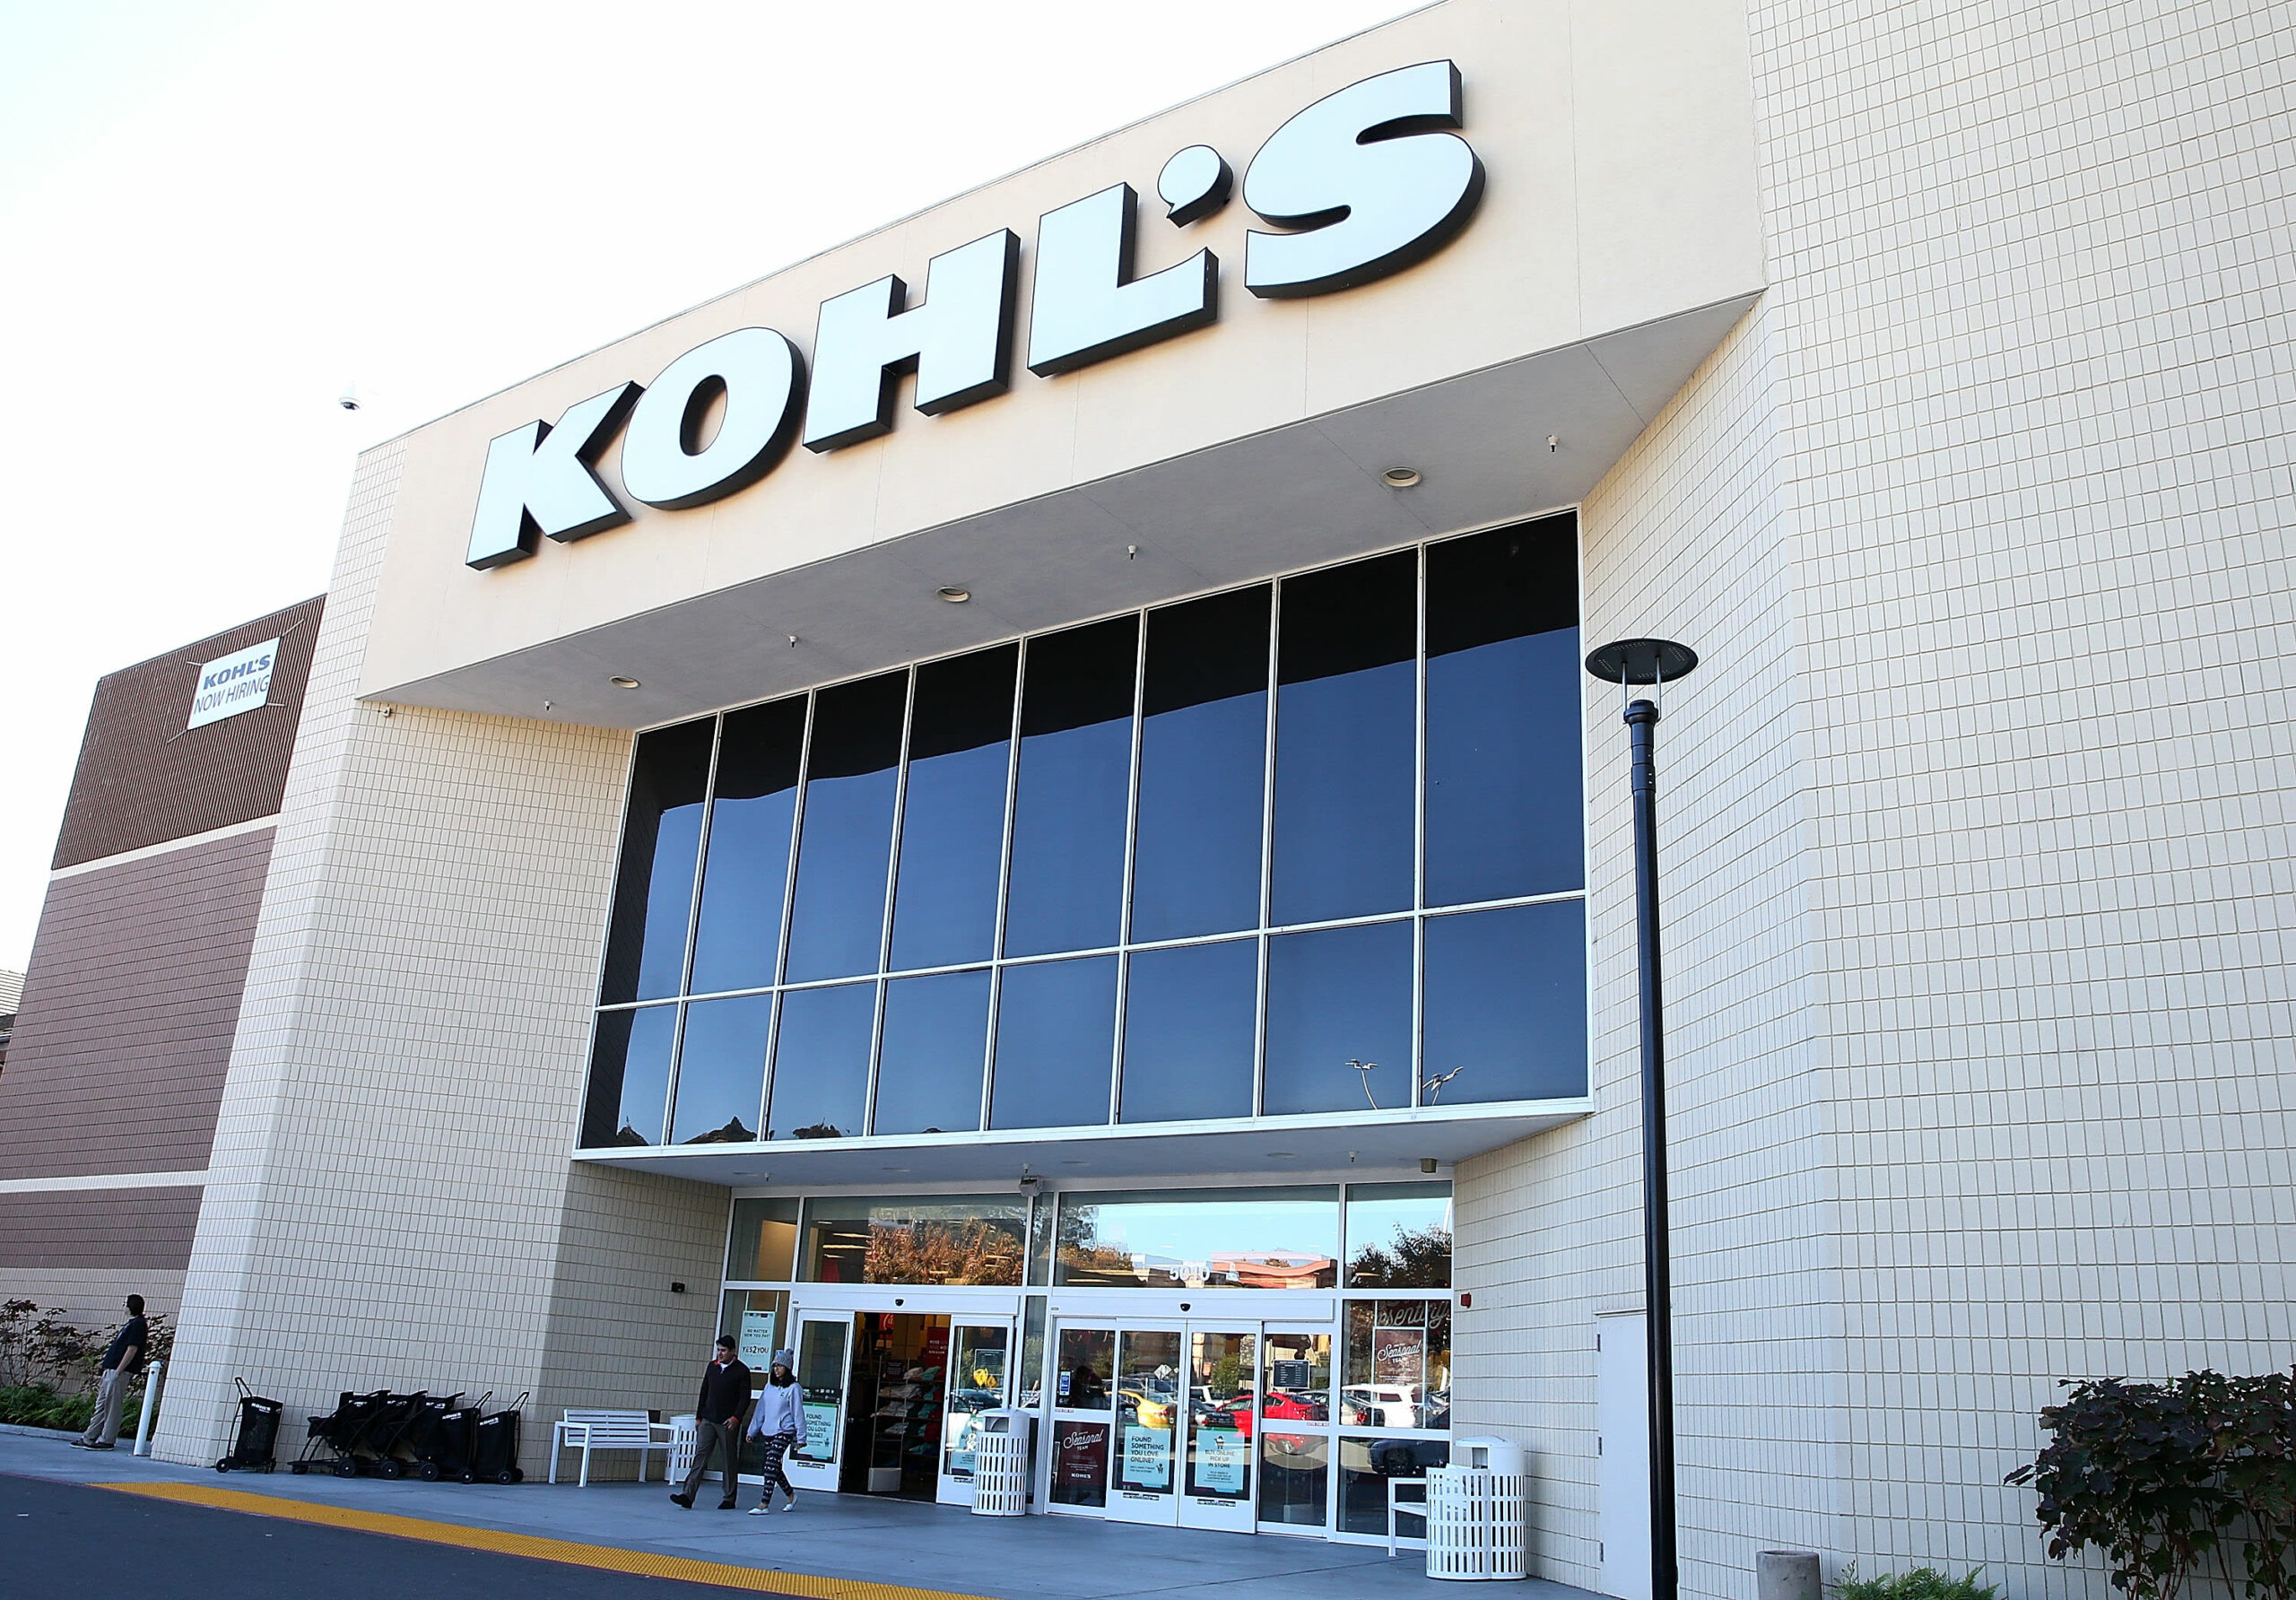 Activist group says Kohl’s earnings present ‘better of worst’ in retail